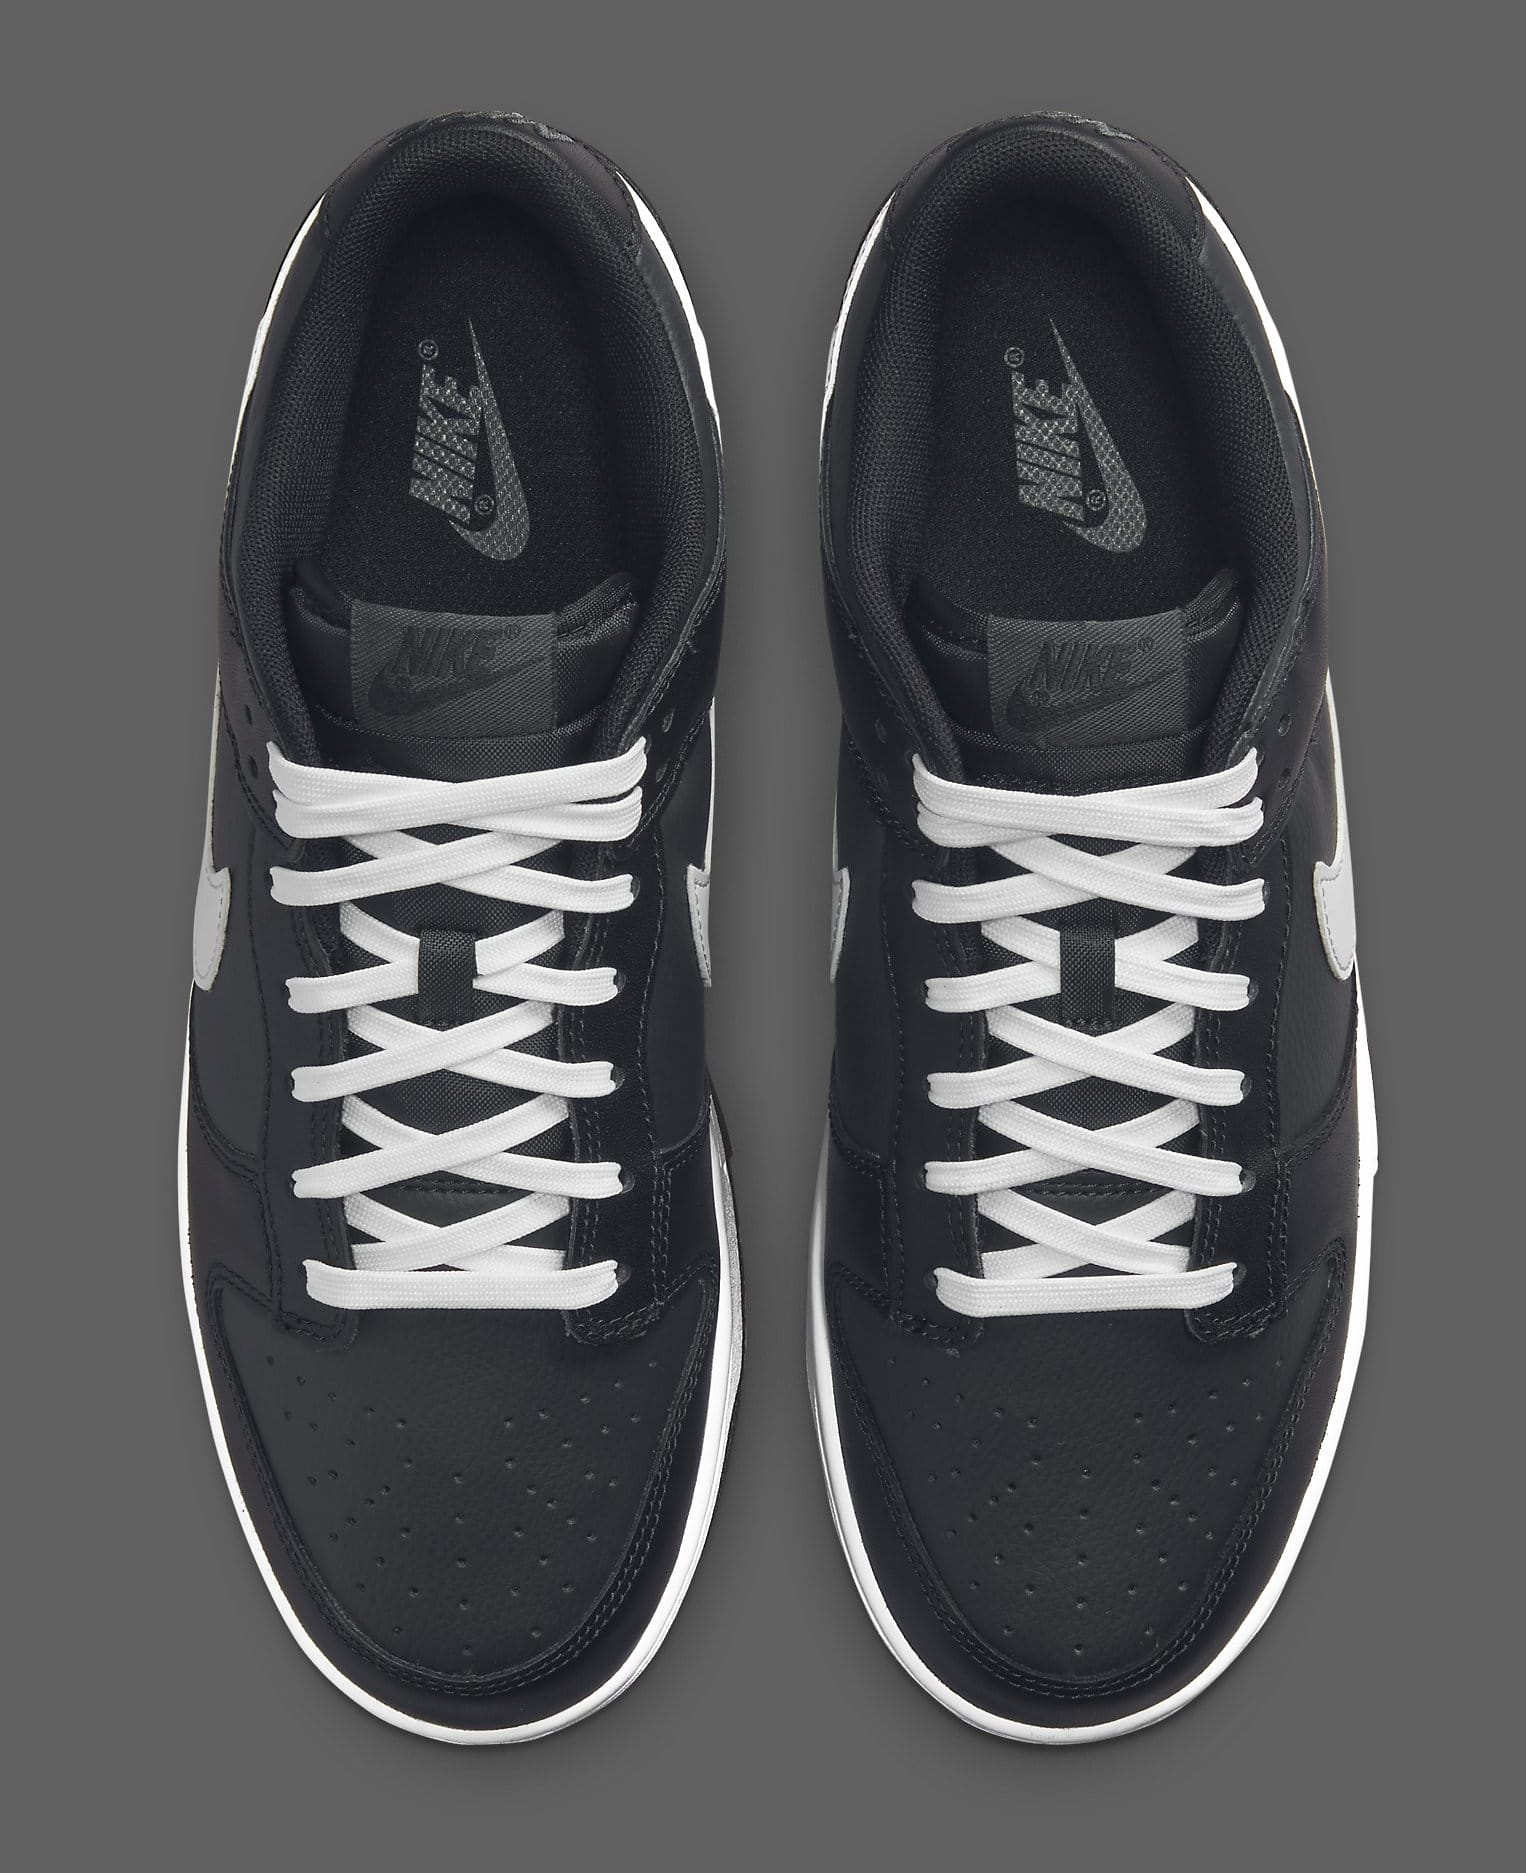 Nike Dunk Low 'Black/White' DJ6188-002 Release Date | Sole Collector